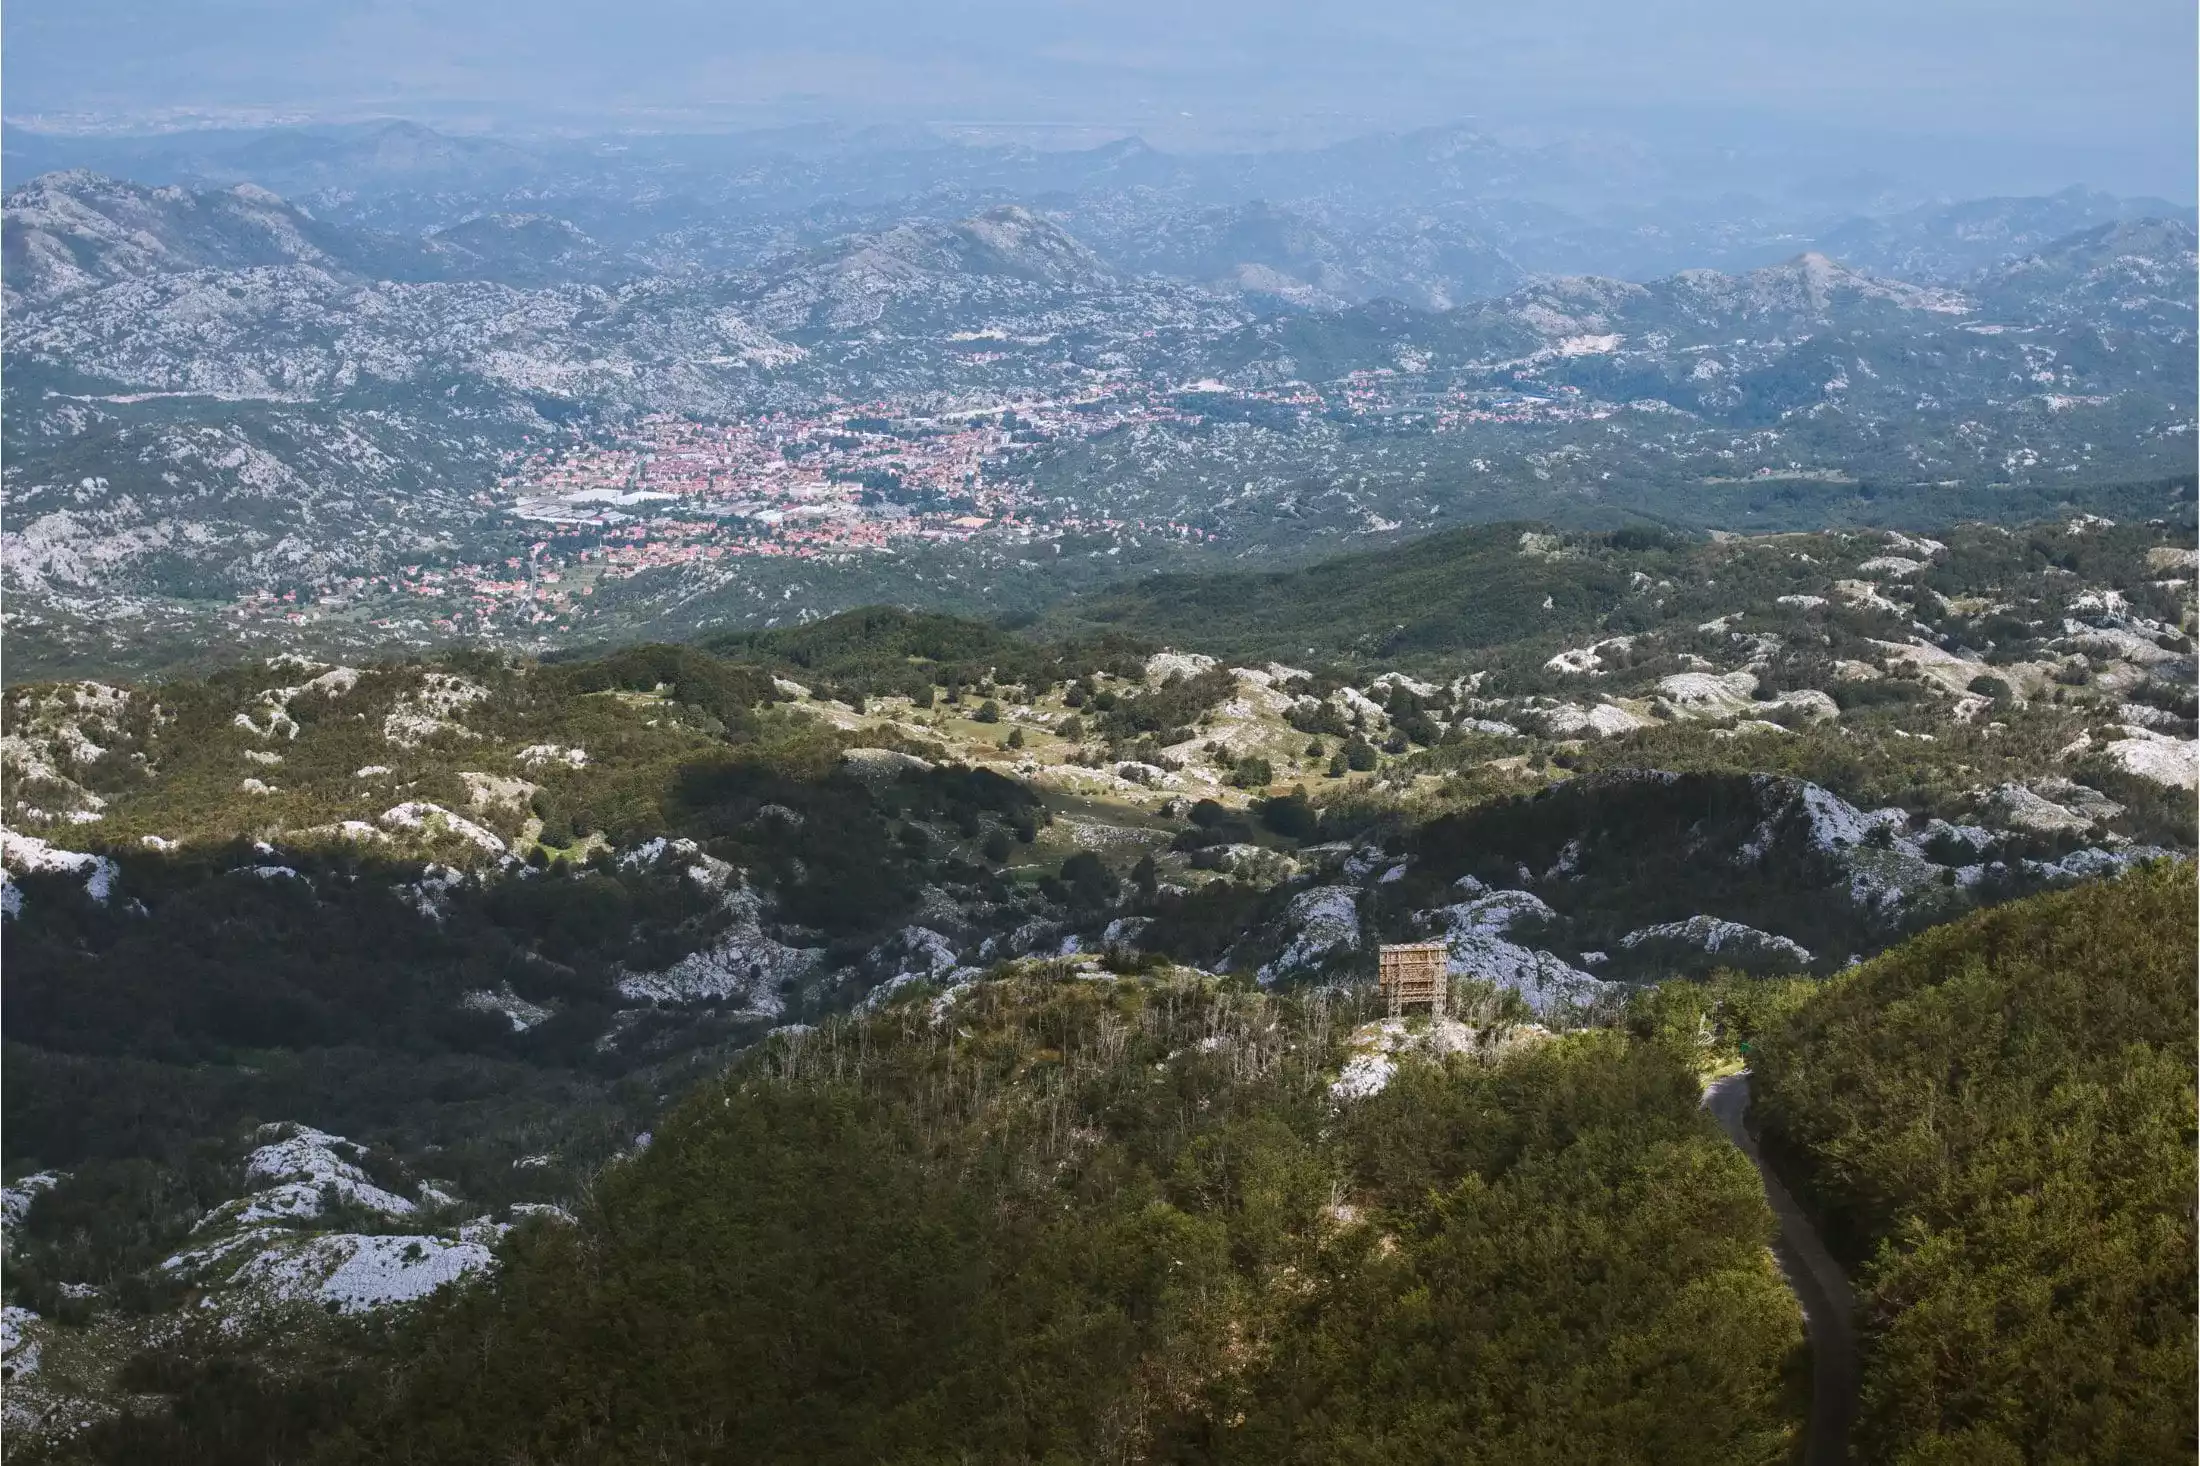 Cetinje, as can be seen from a top Lovćen